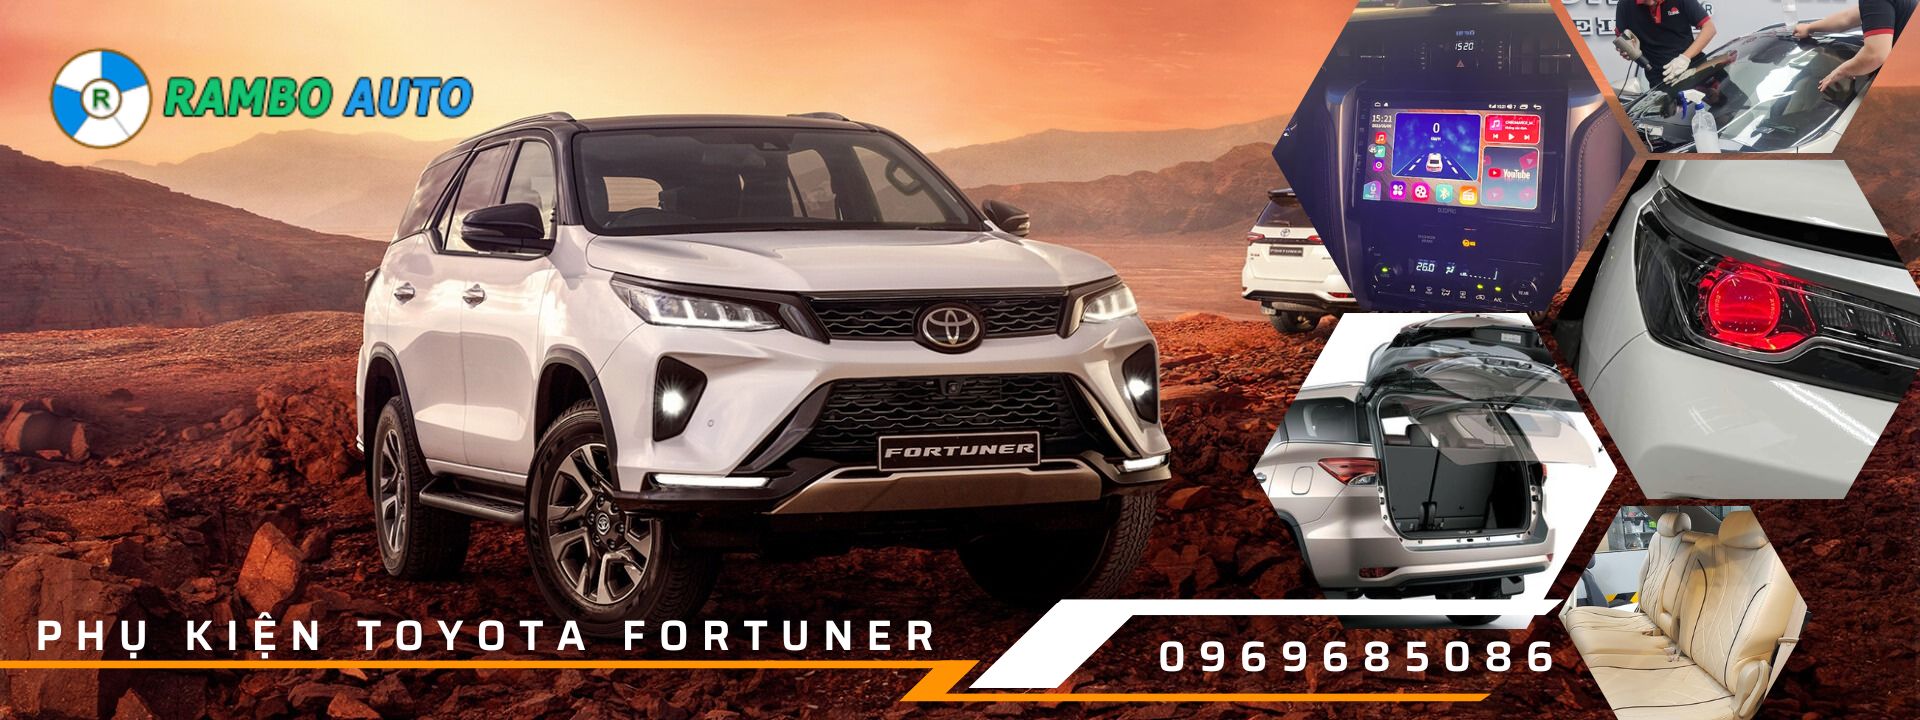 fortuner-cover